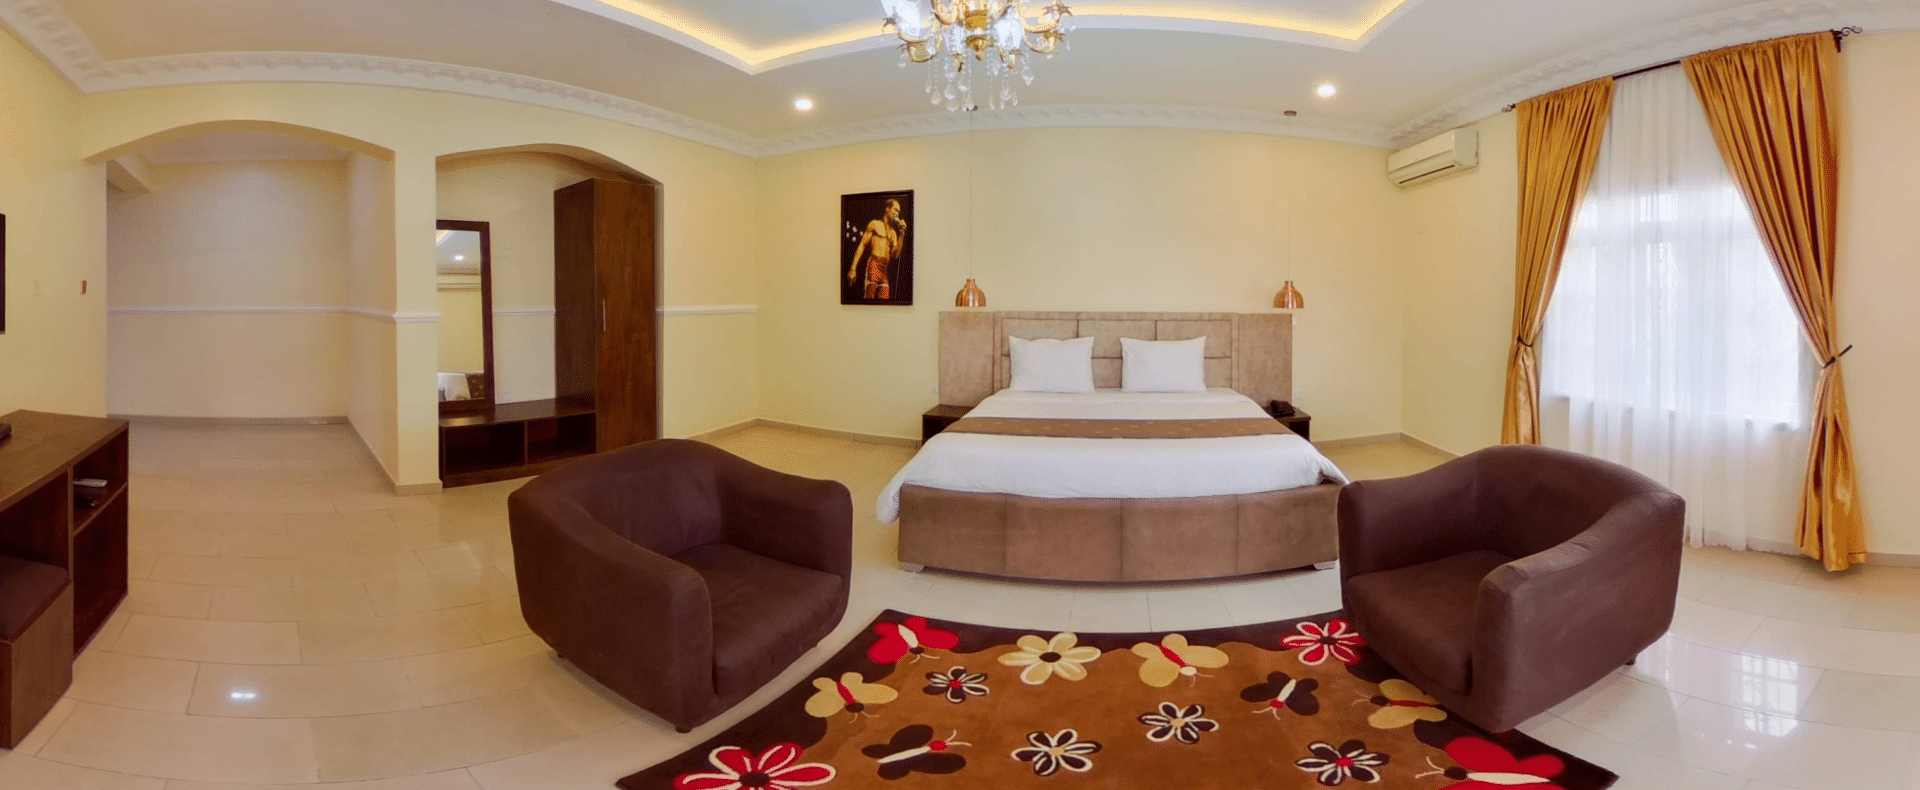 Hotel Deluxe Room For Hotel Booking In Abuja Fct Nigeria